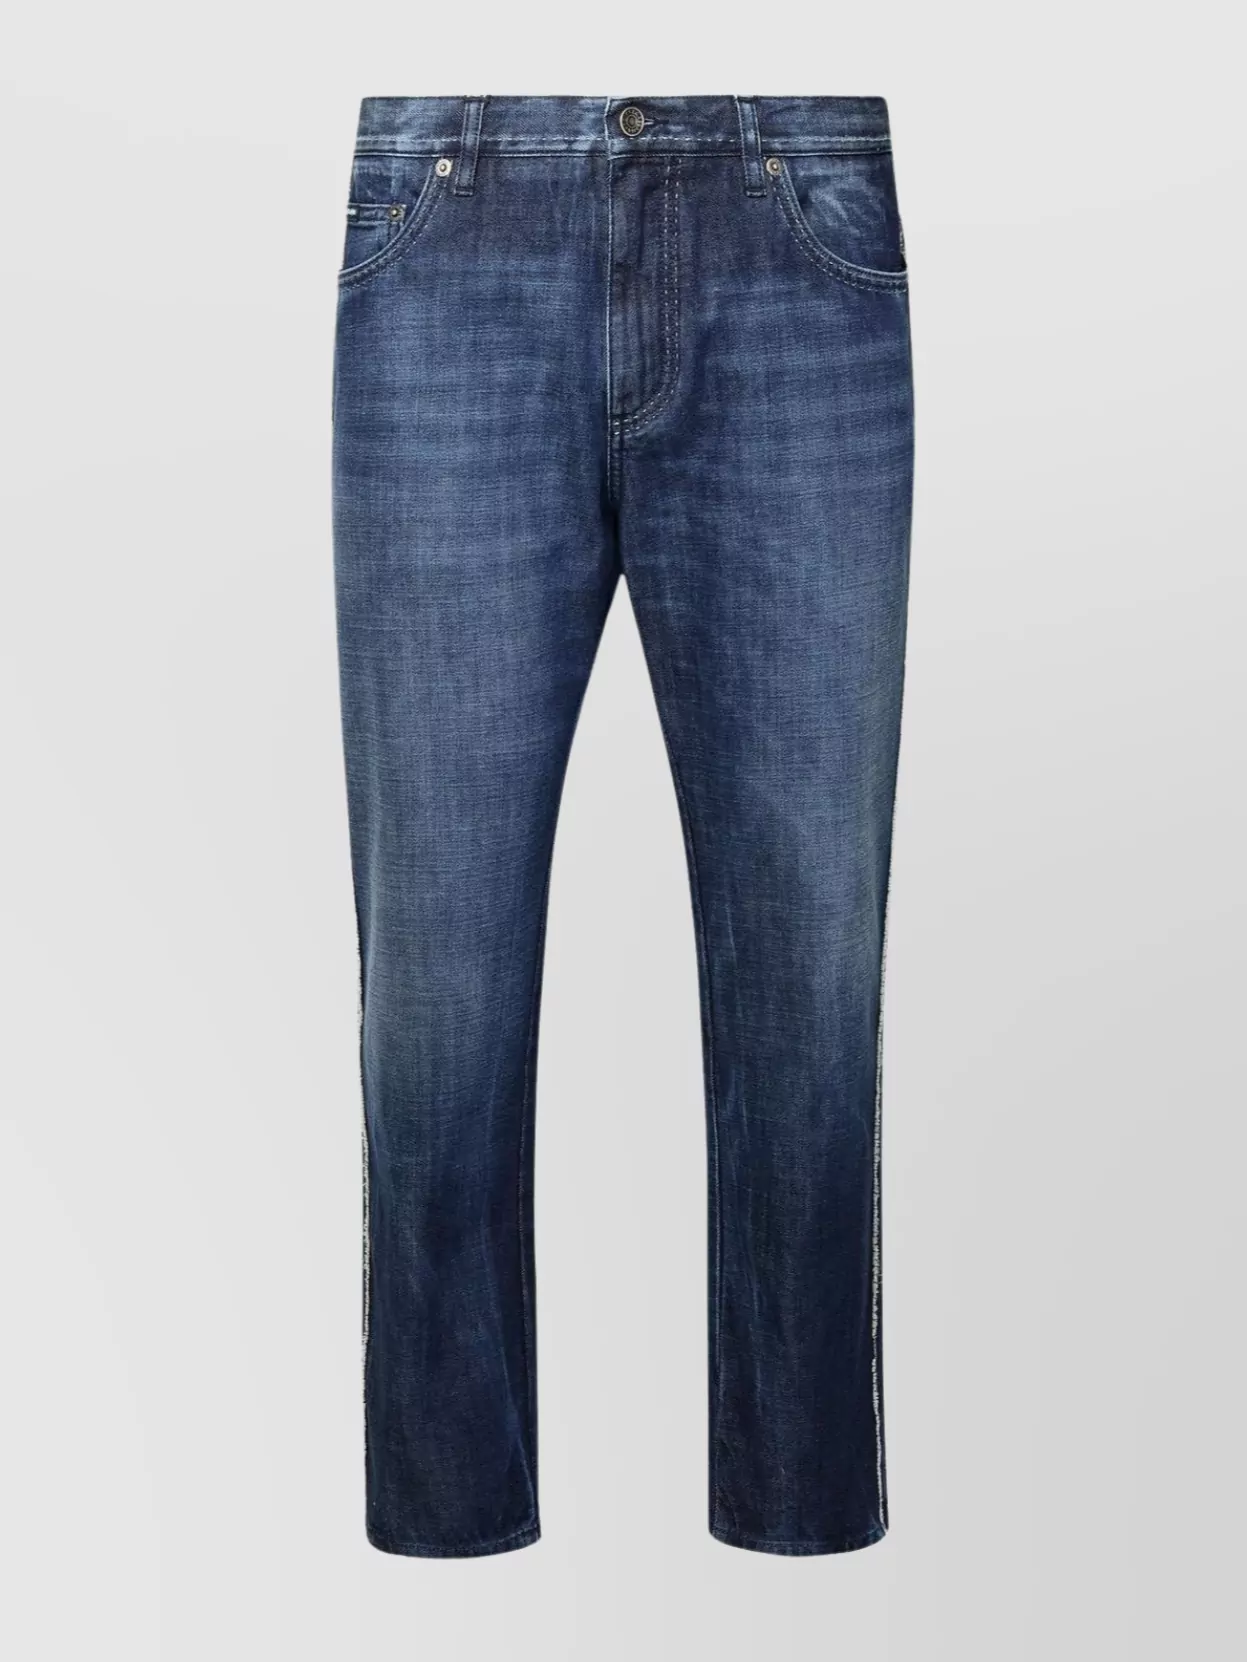 Shop Dolce & Gabbana Faded Stitched Cotton Jeans With Back Pockets